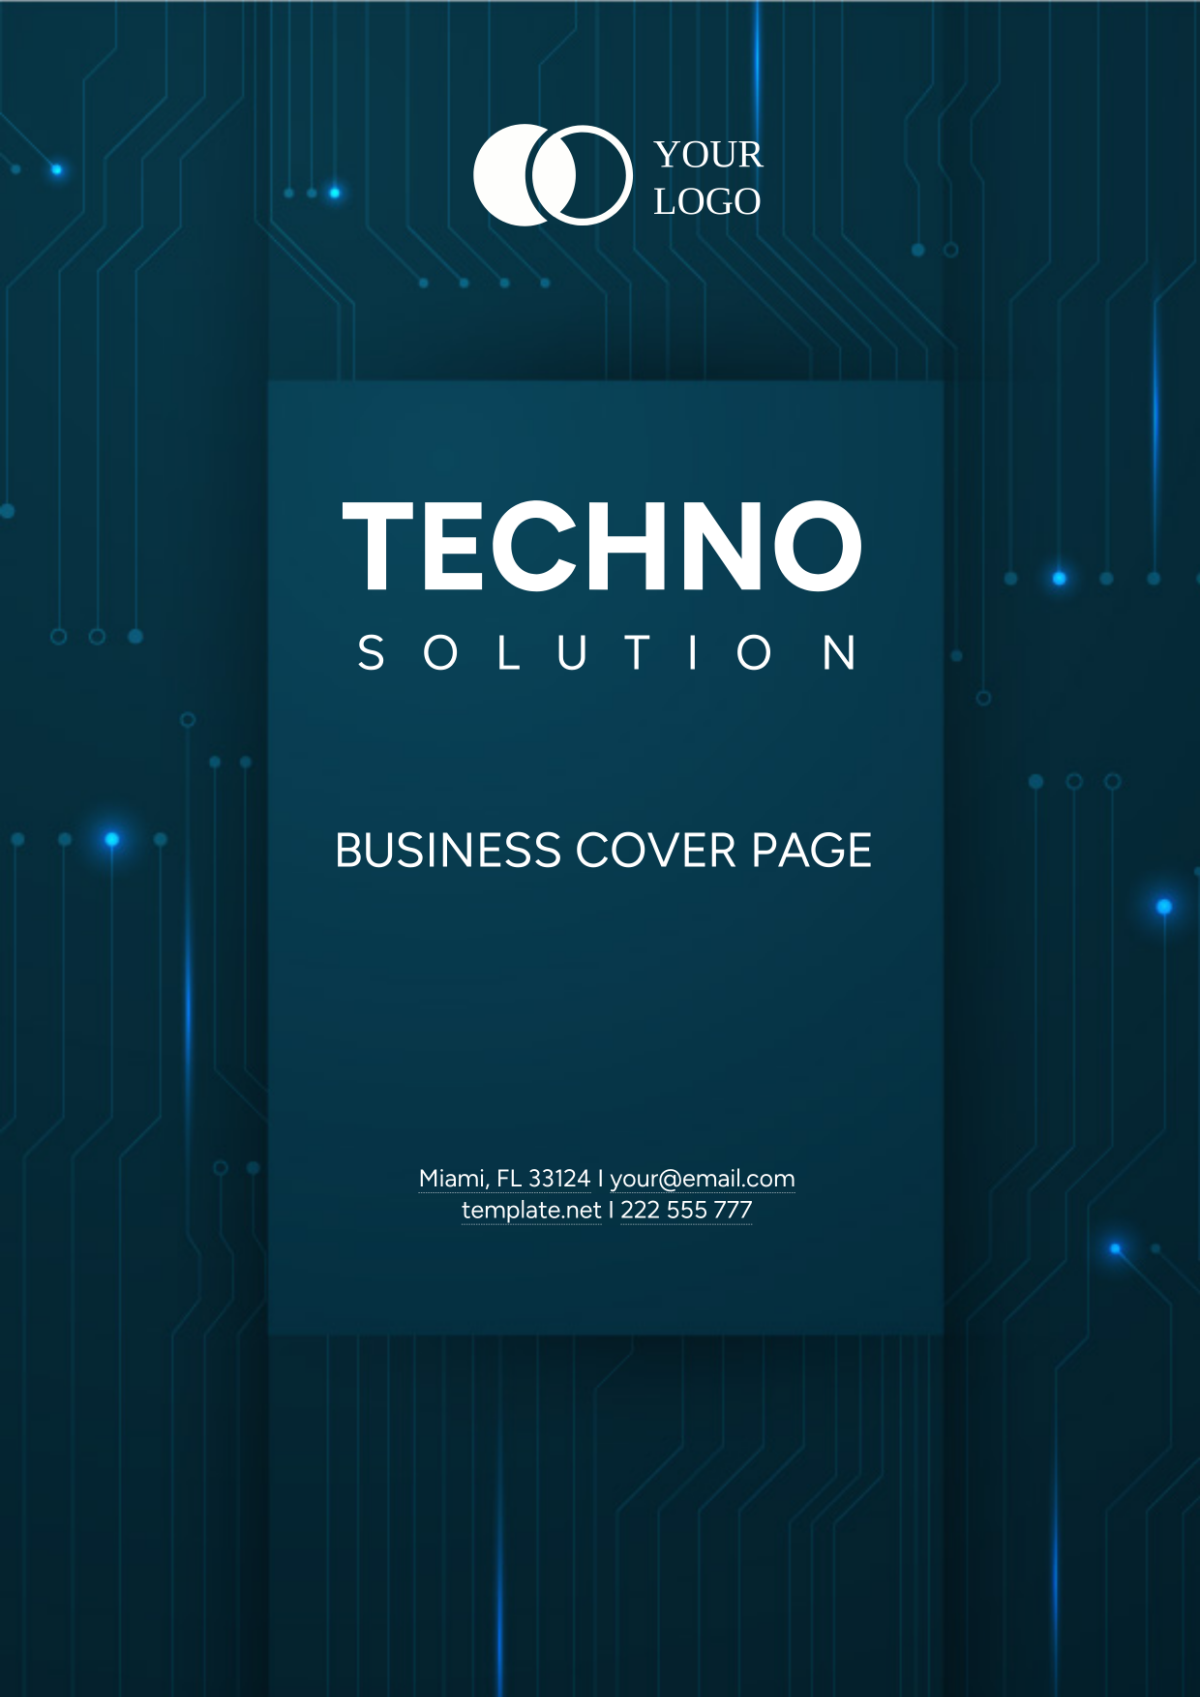 Tech Solutions Business Cover Page Template